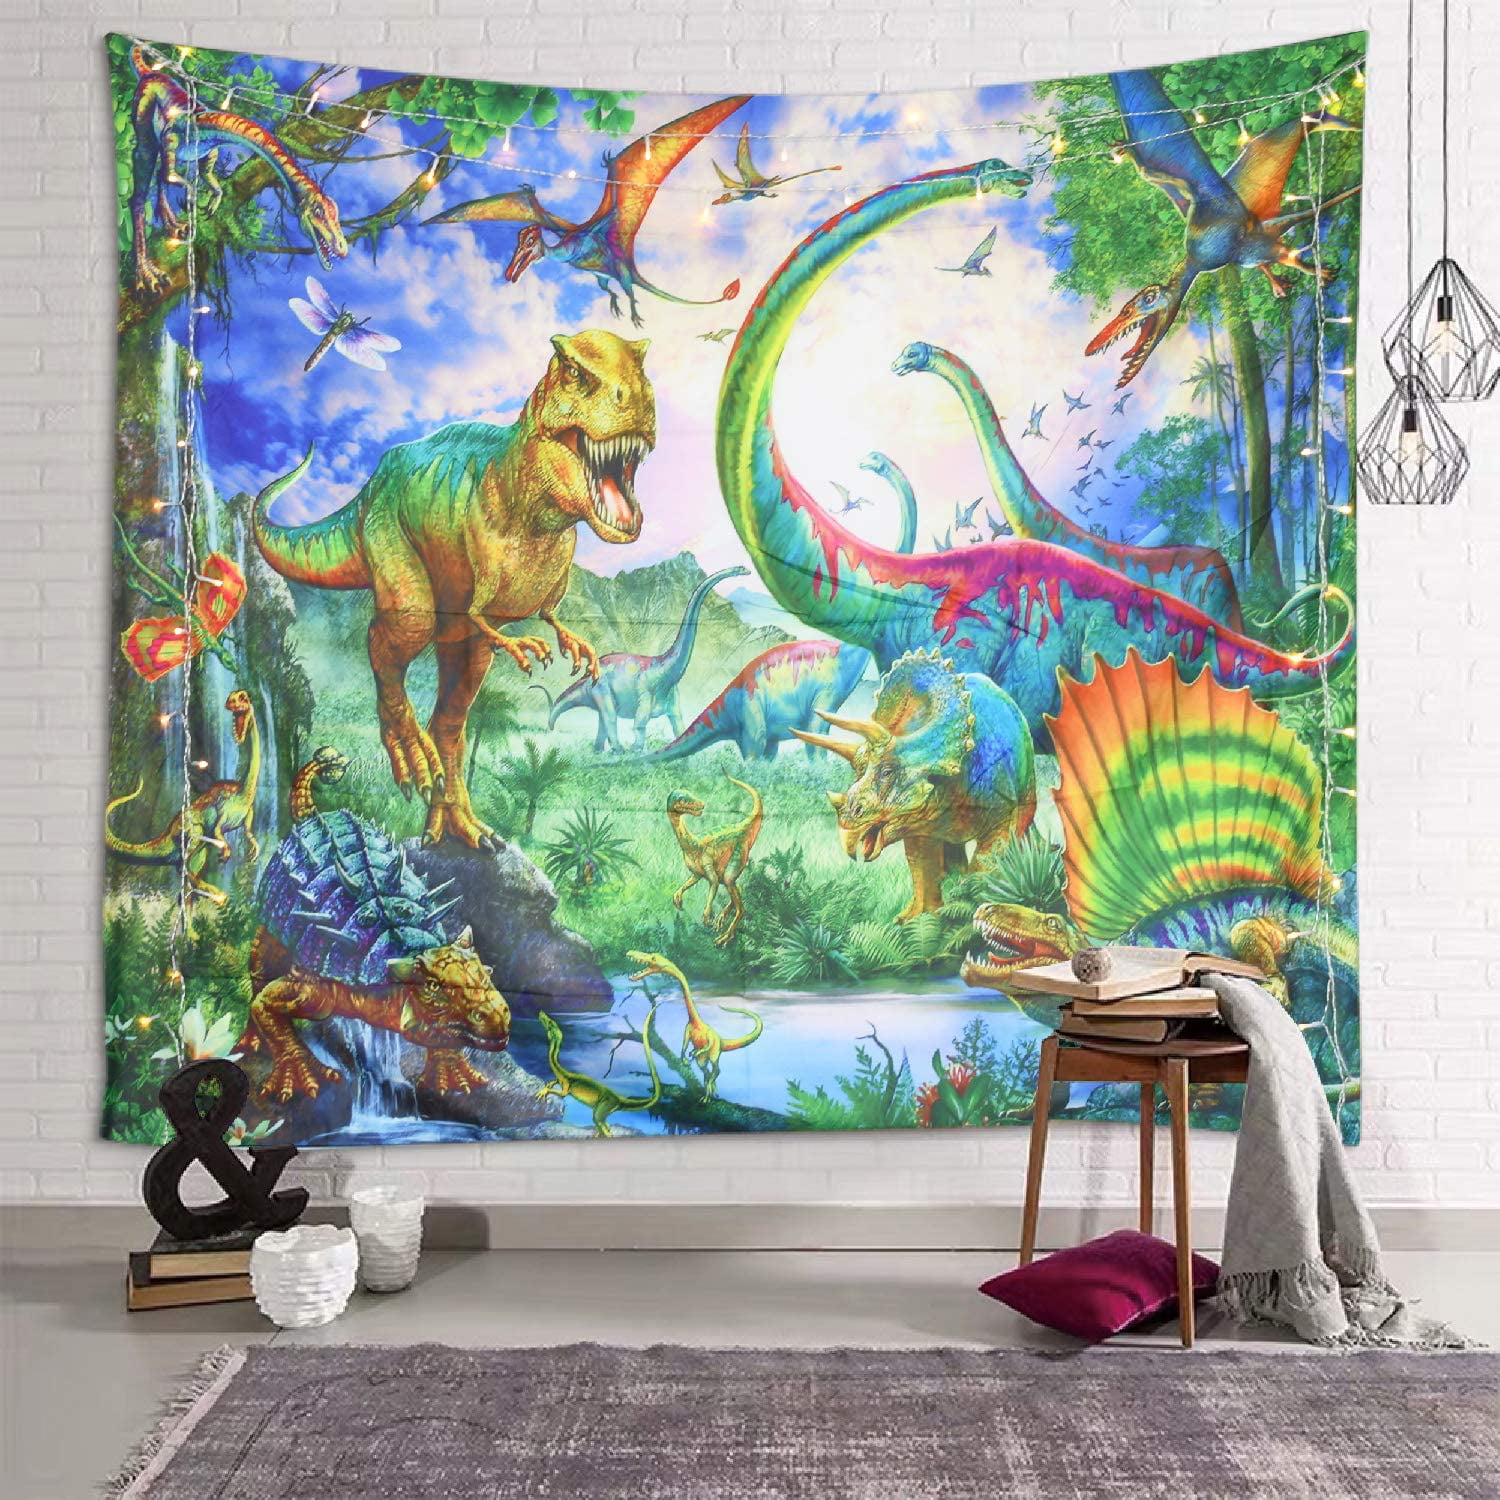 Genfien Dinosaur Tapestry for Bedroom Home Decorations Tapestry Wall Hanging 3D Printing Wall Blanket Wall Hanging Poster for Living Room Bedroom Dorm Decor 150*200 